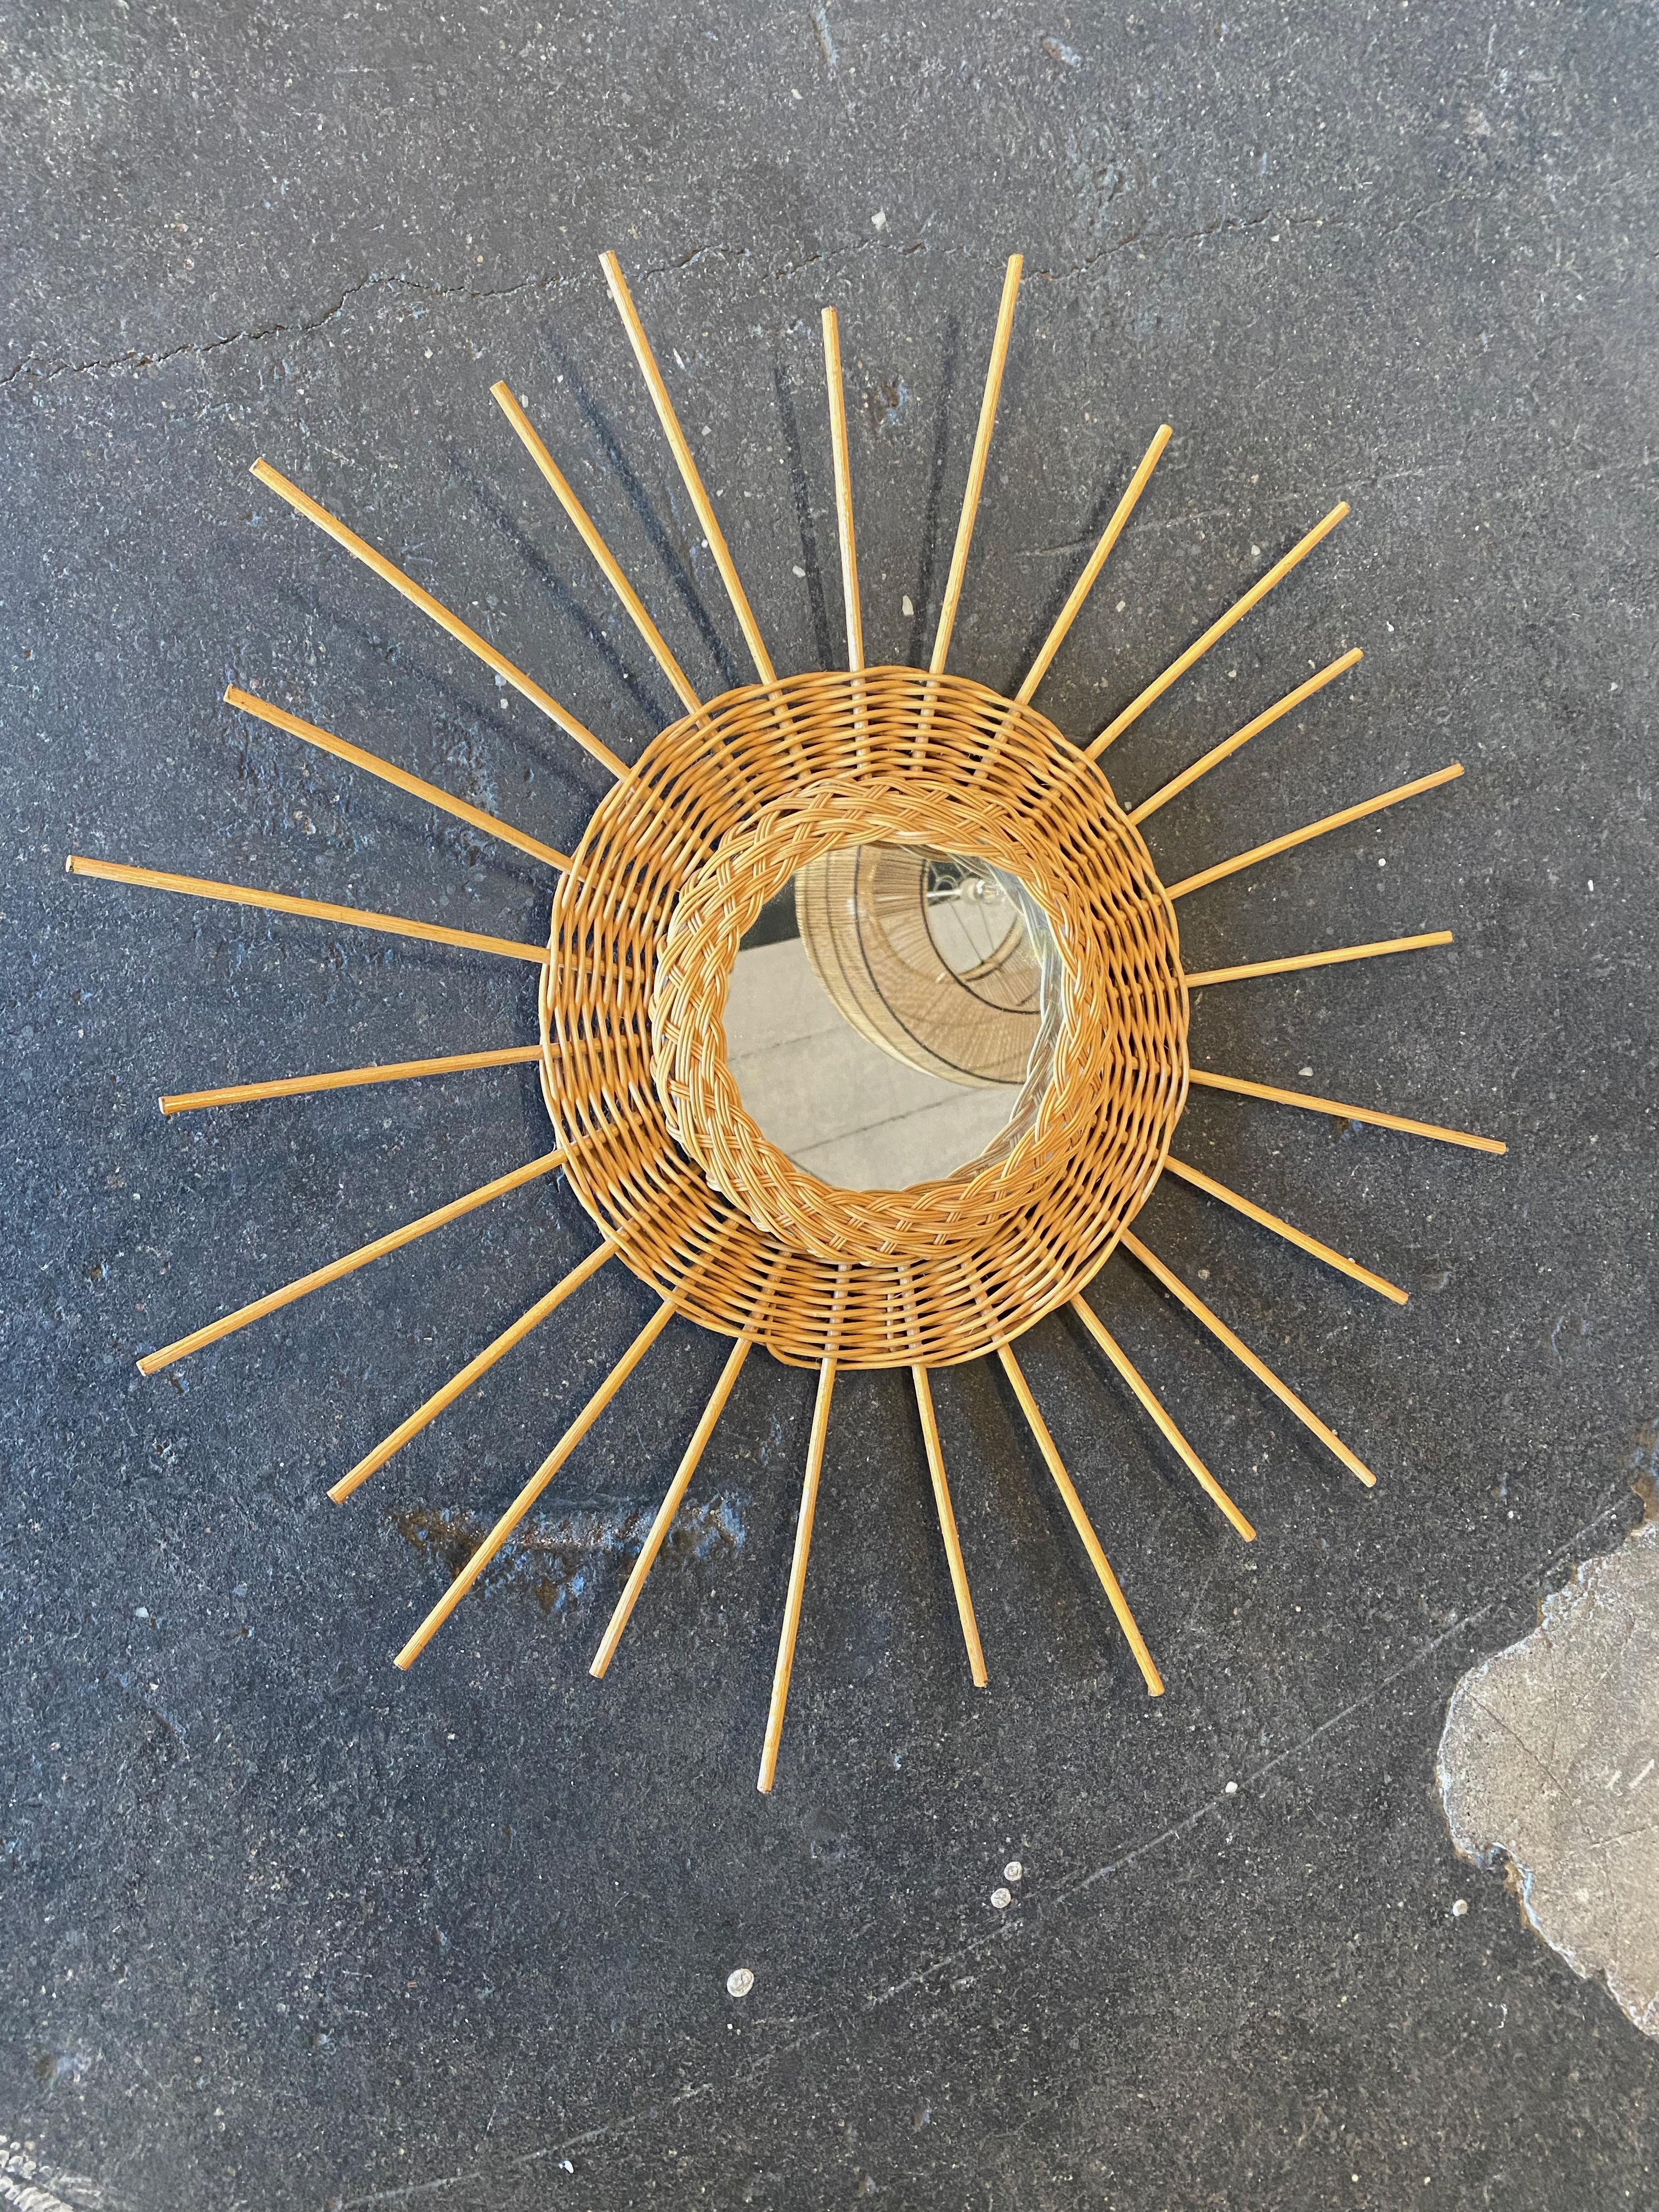 Vintage wicker sun mirror from the 1950s. Great wall decoration in the bedroom, living or dining room, this Fifties Chic will bring joy into your home. Can also be combined wonderfully with other wall decor à la Petersburg hanging!

The mirror and